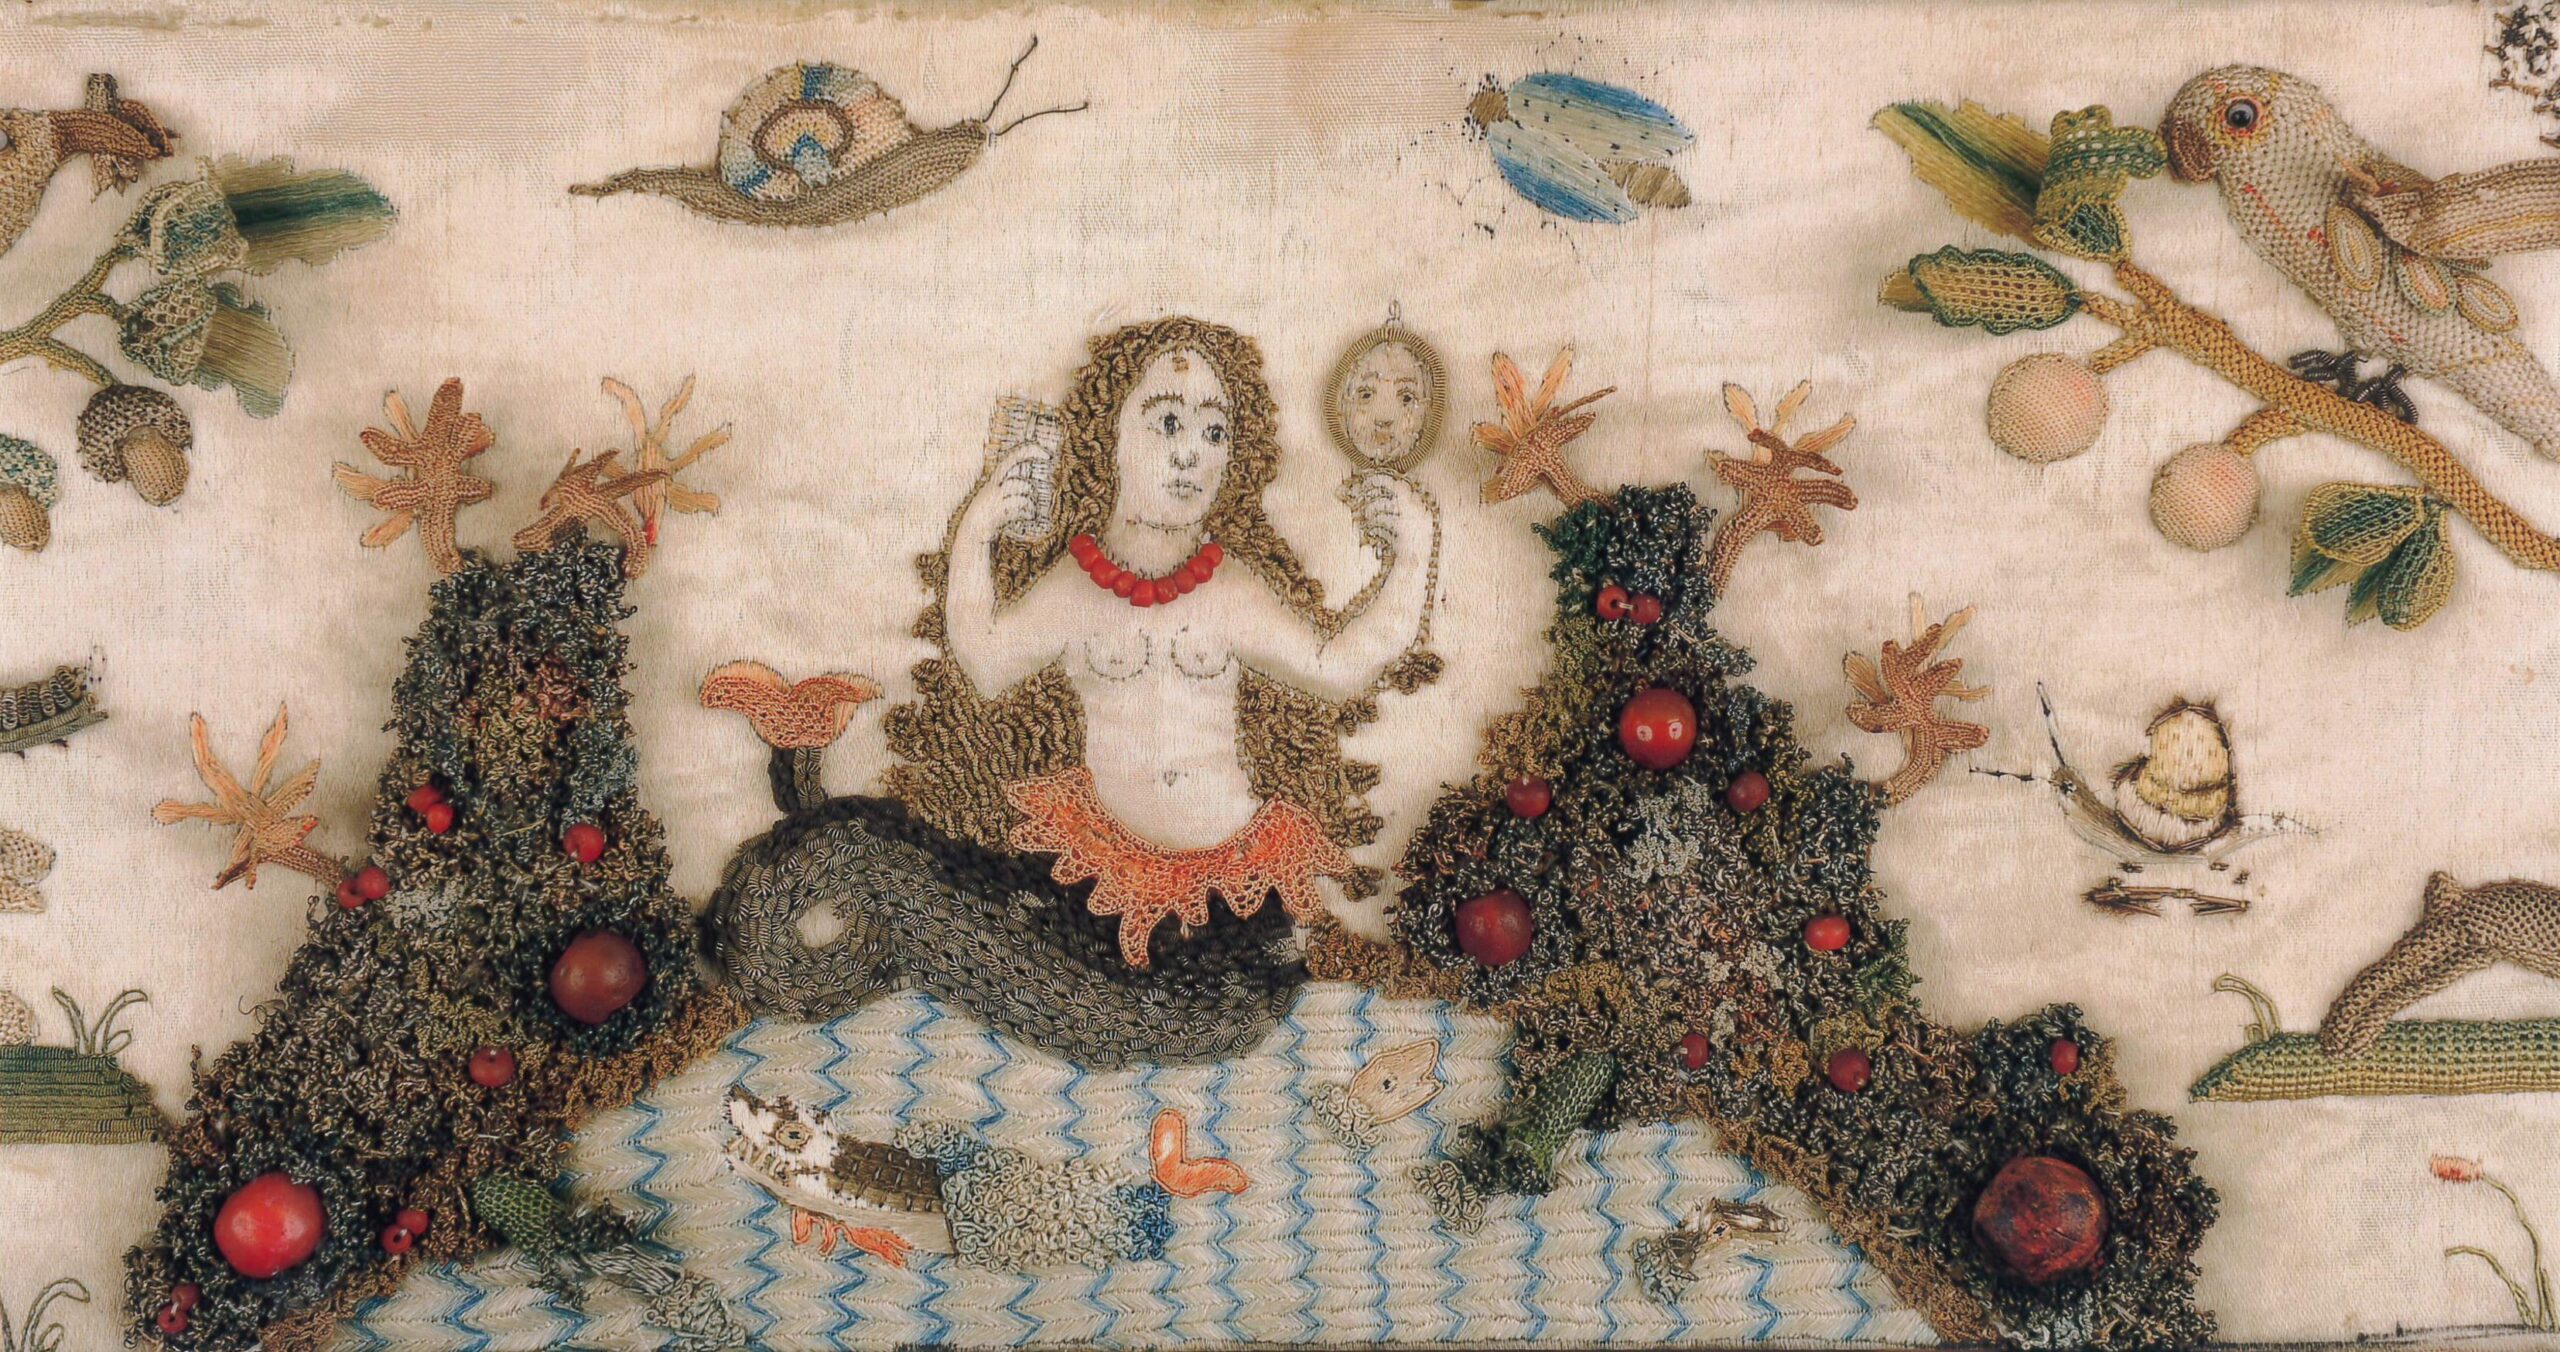 Raised embroidery depicting a mermaid